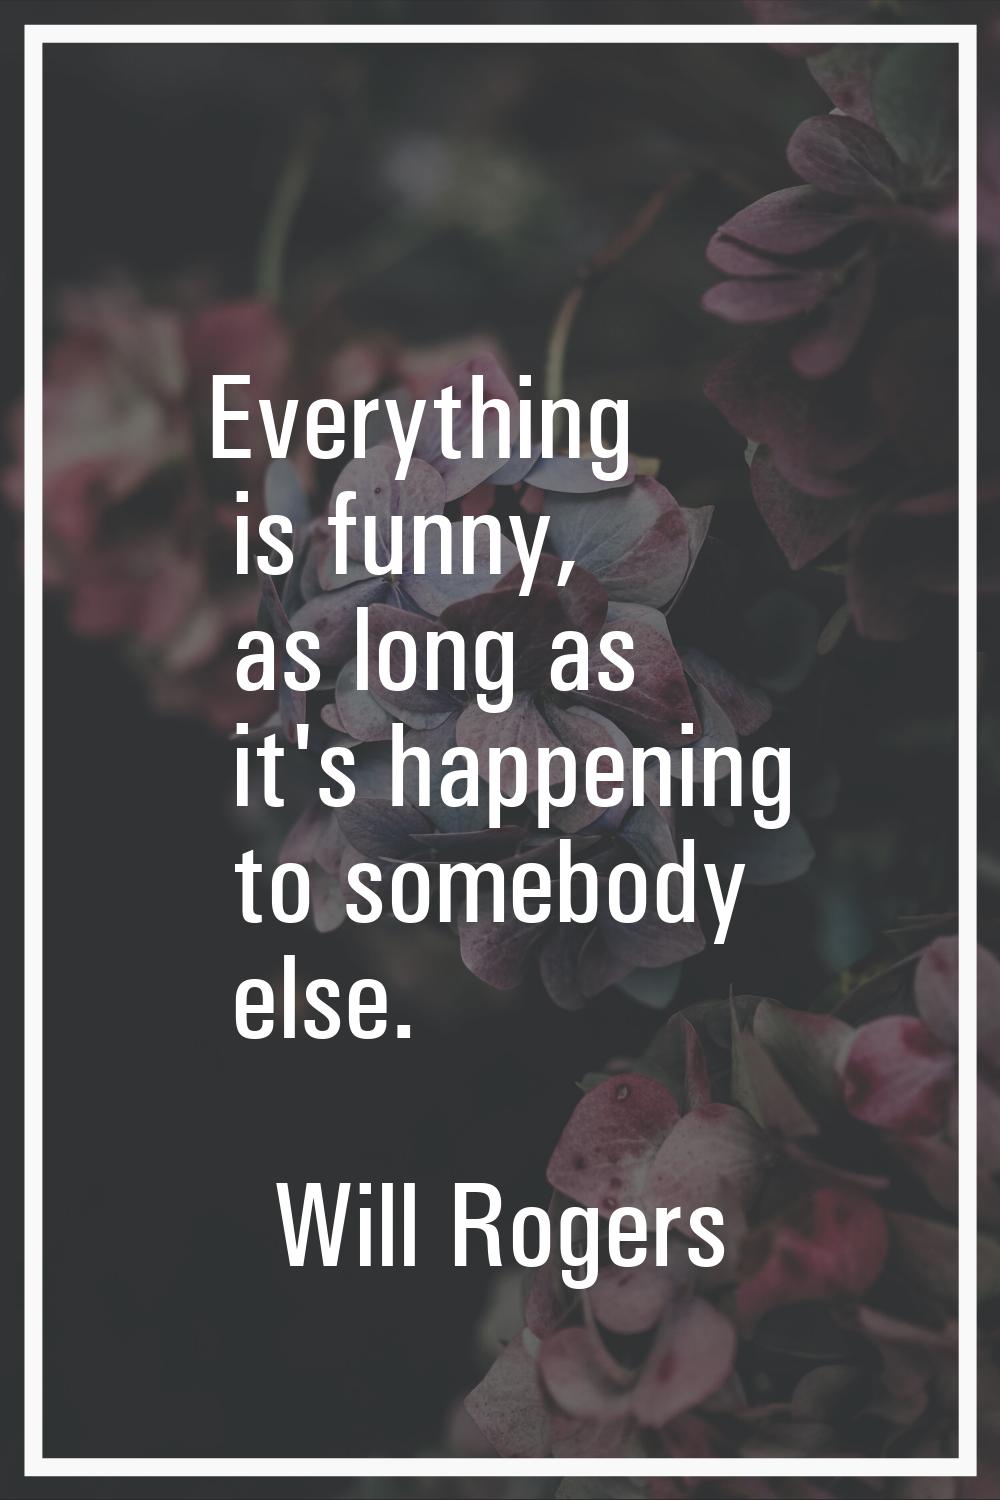 Everything is funny, as long as it's happening to somebody else.